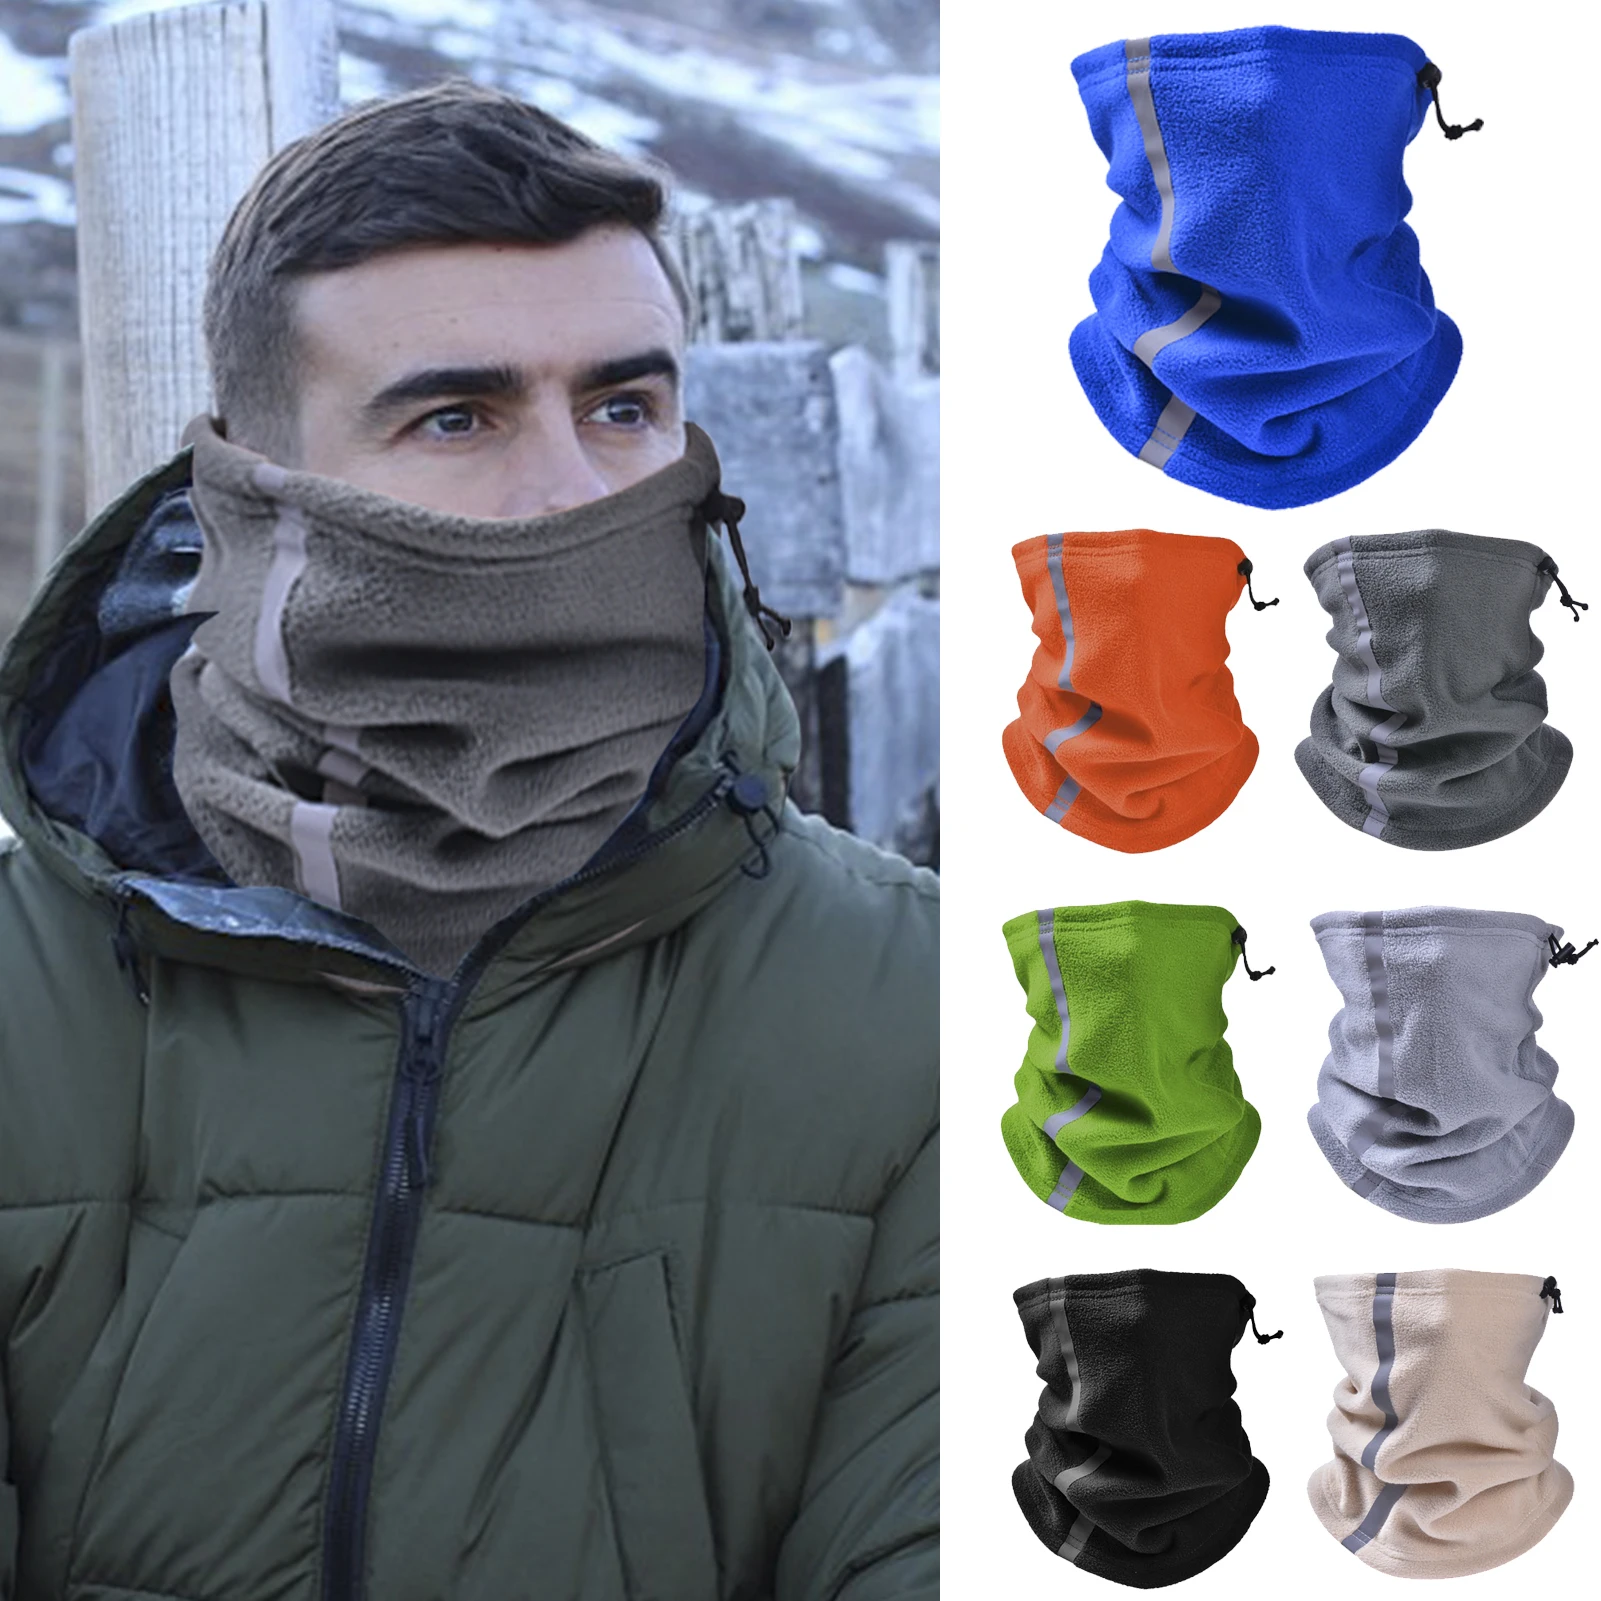 Neck Warmer CB200 Camping & Hiking Hiking Clothings Other Sports Equipment Outdoor and Sports Skiing & Snowboarding Sports Accessories